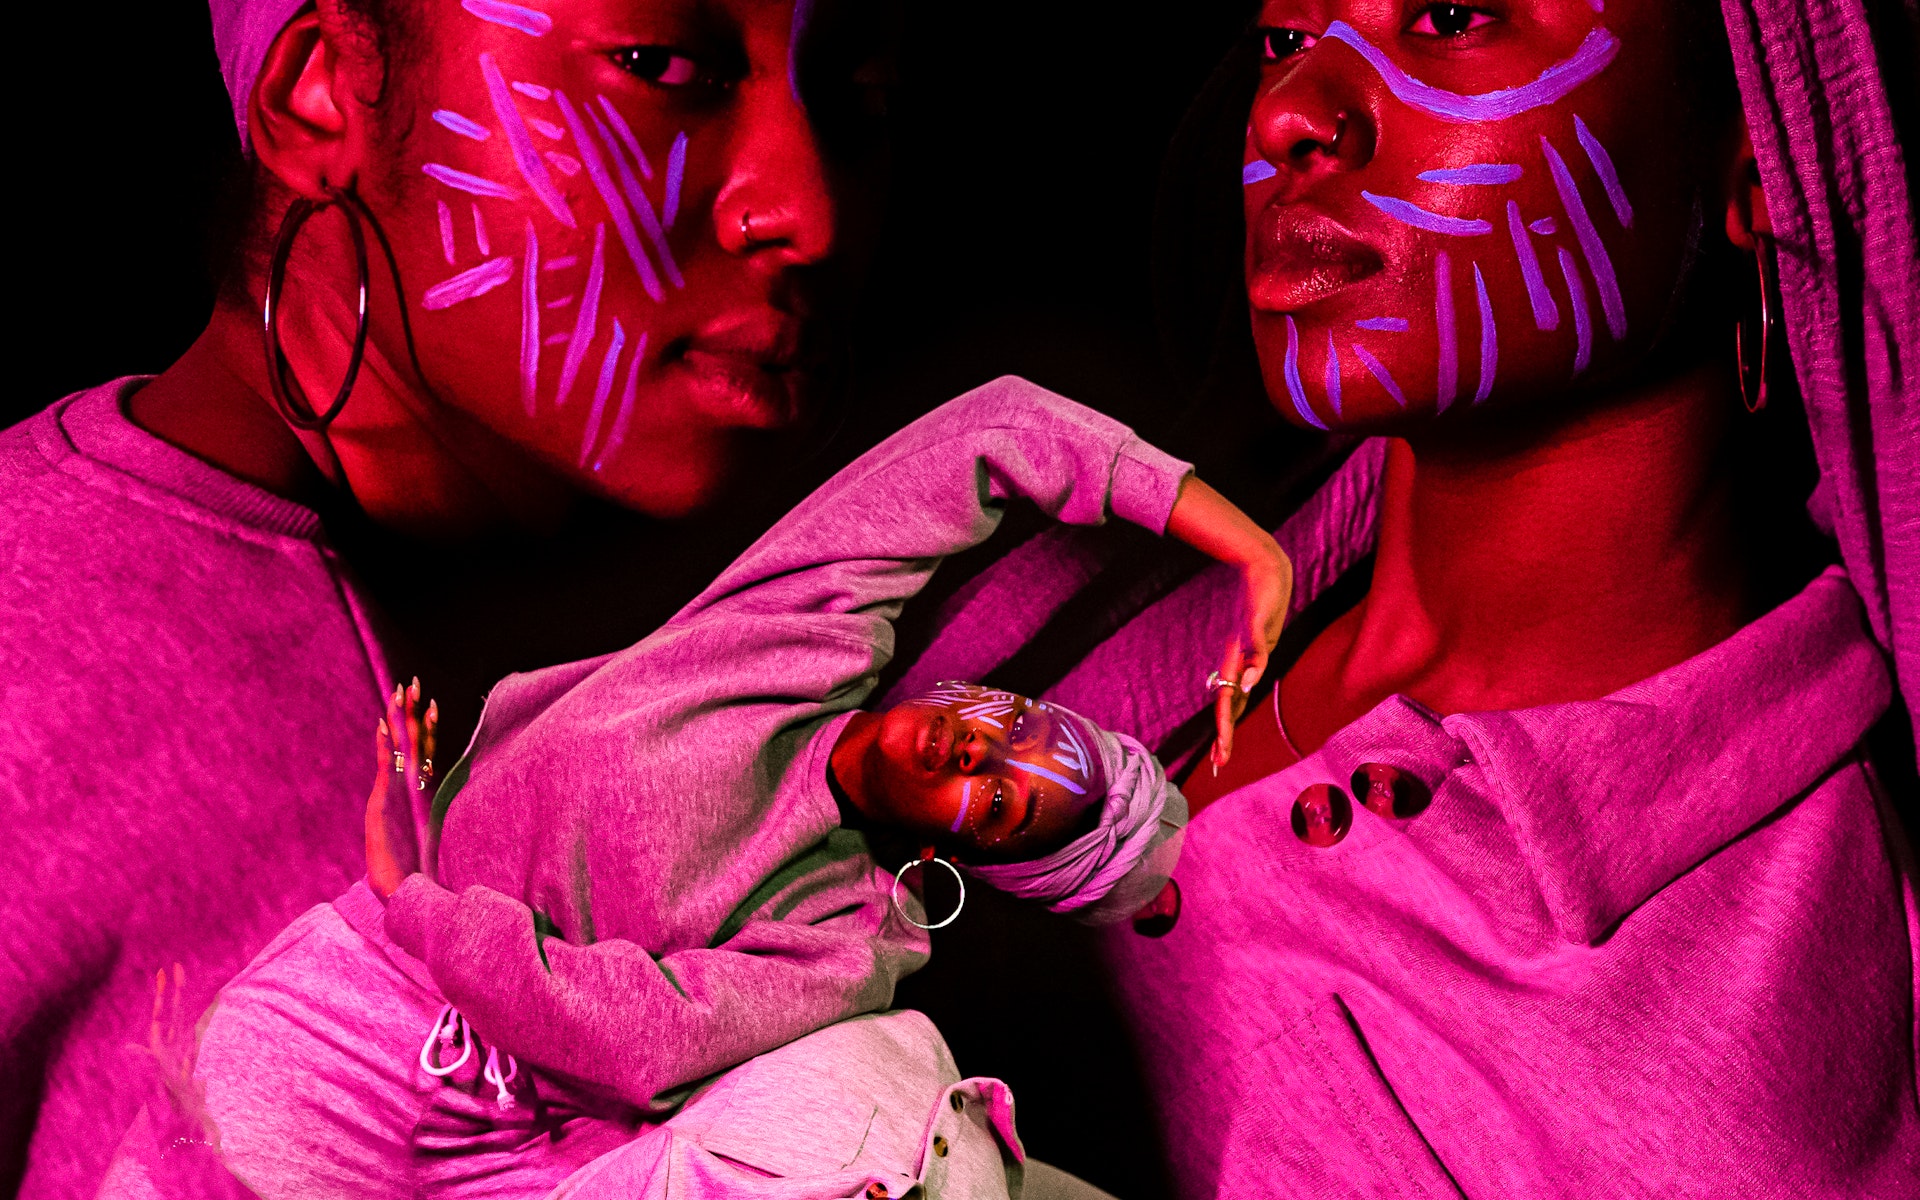 image of dancers superimposed on each other, bathed in colorful light with black background